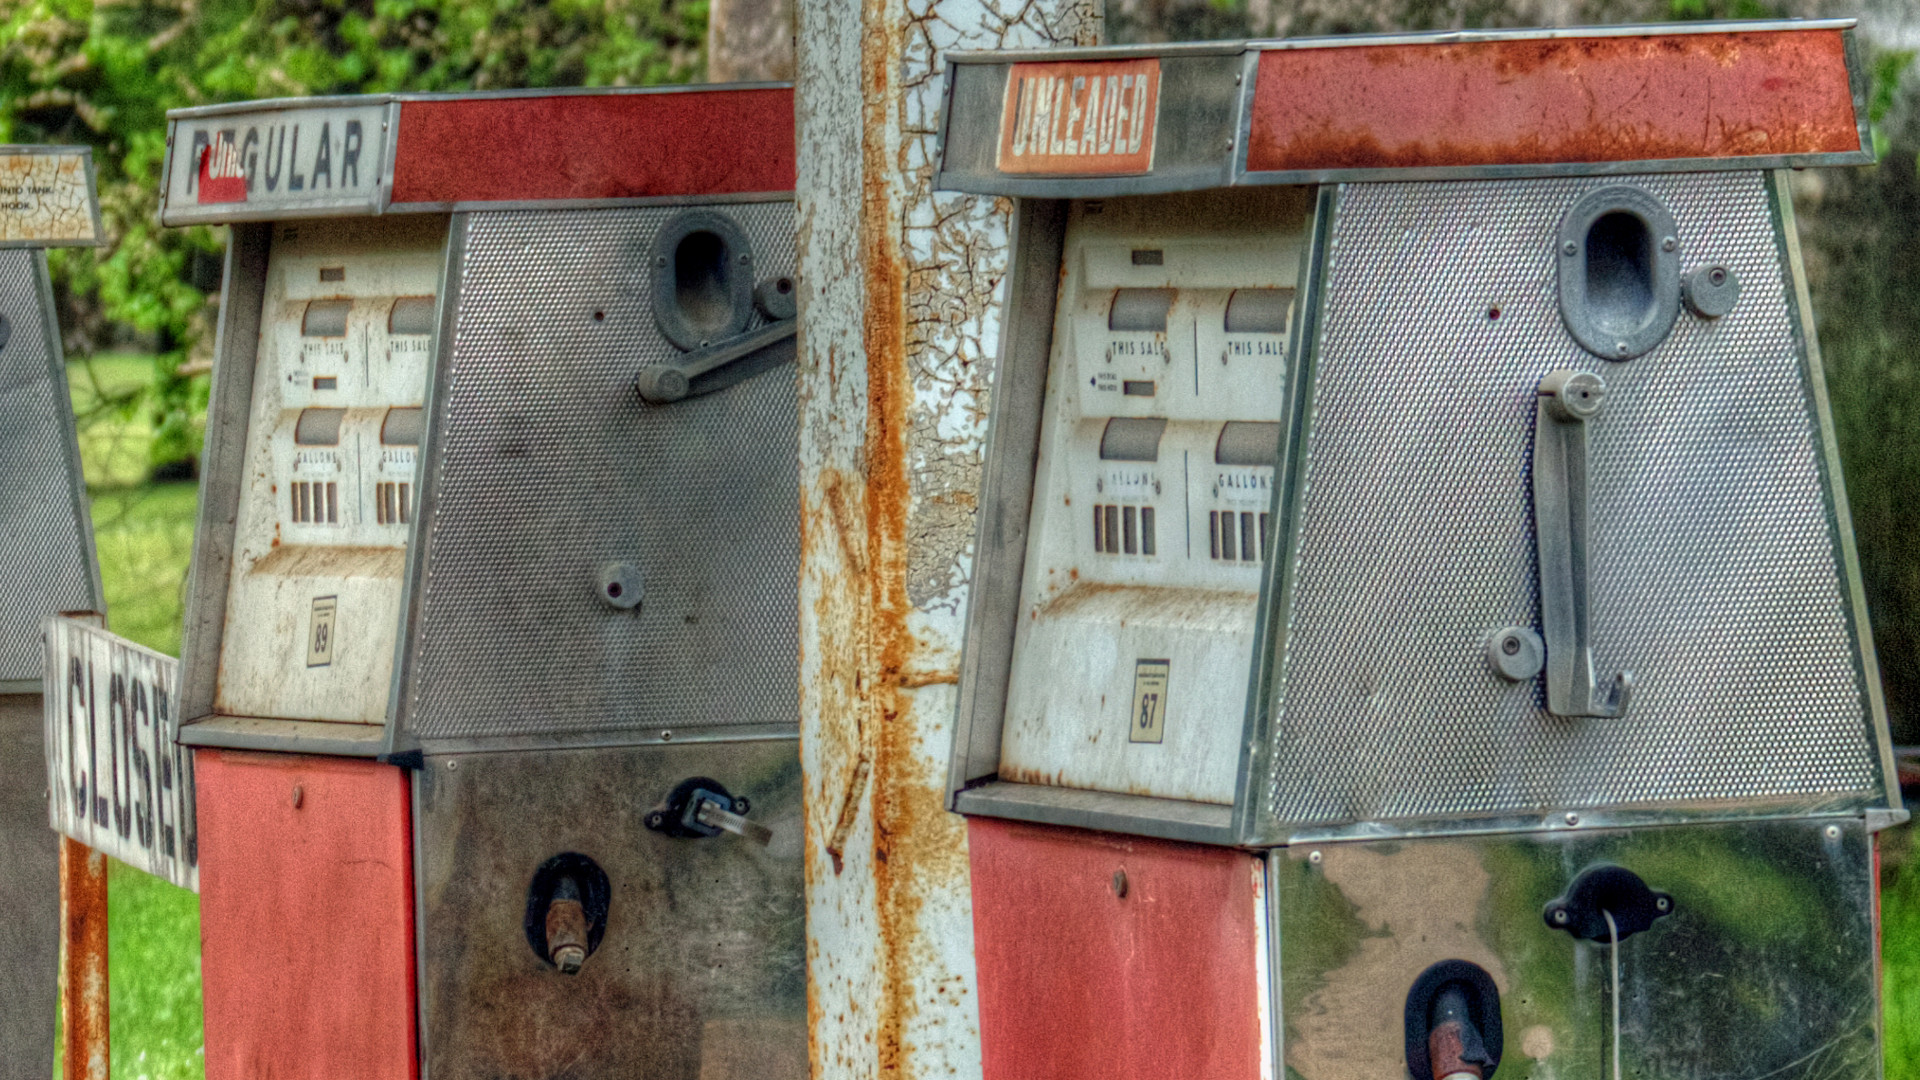 old gas pumps